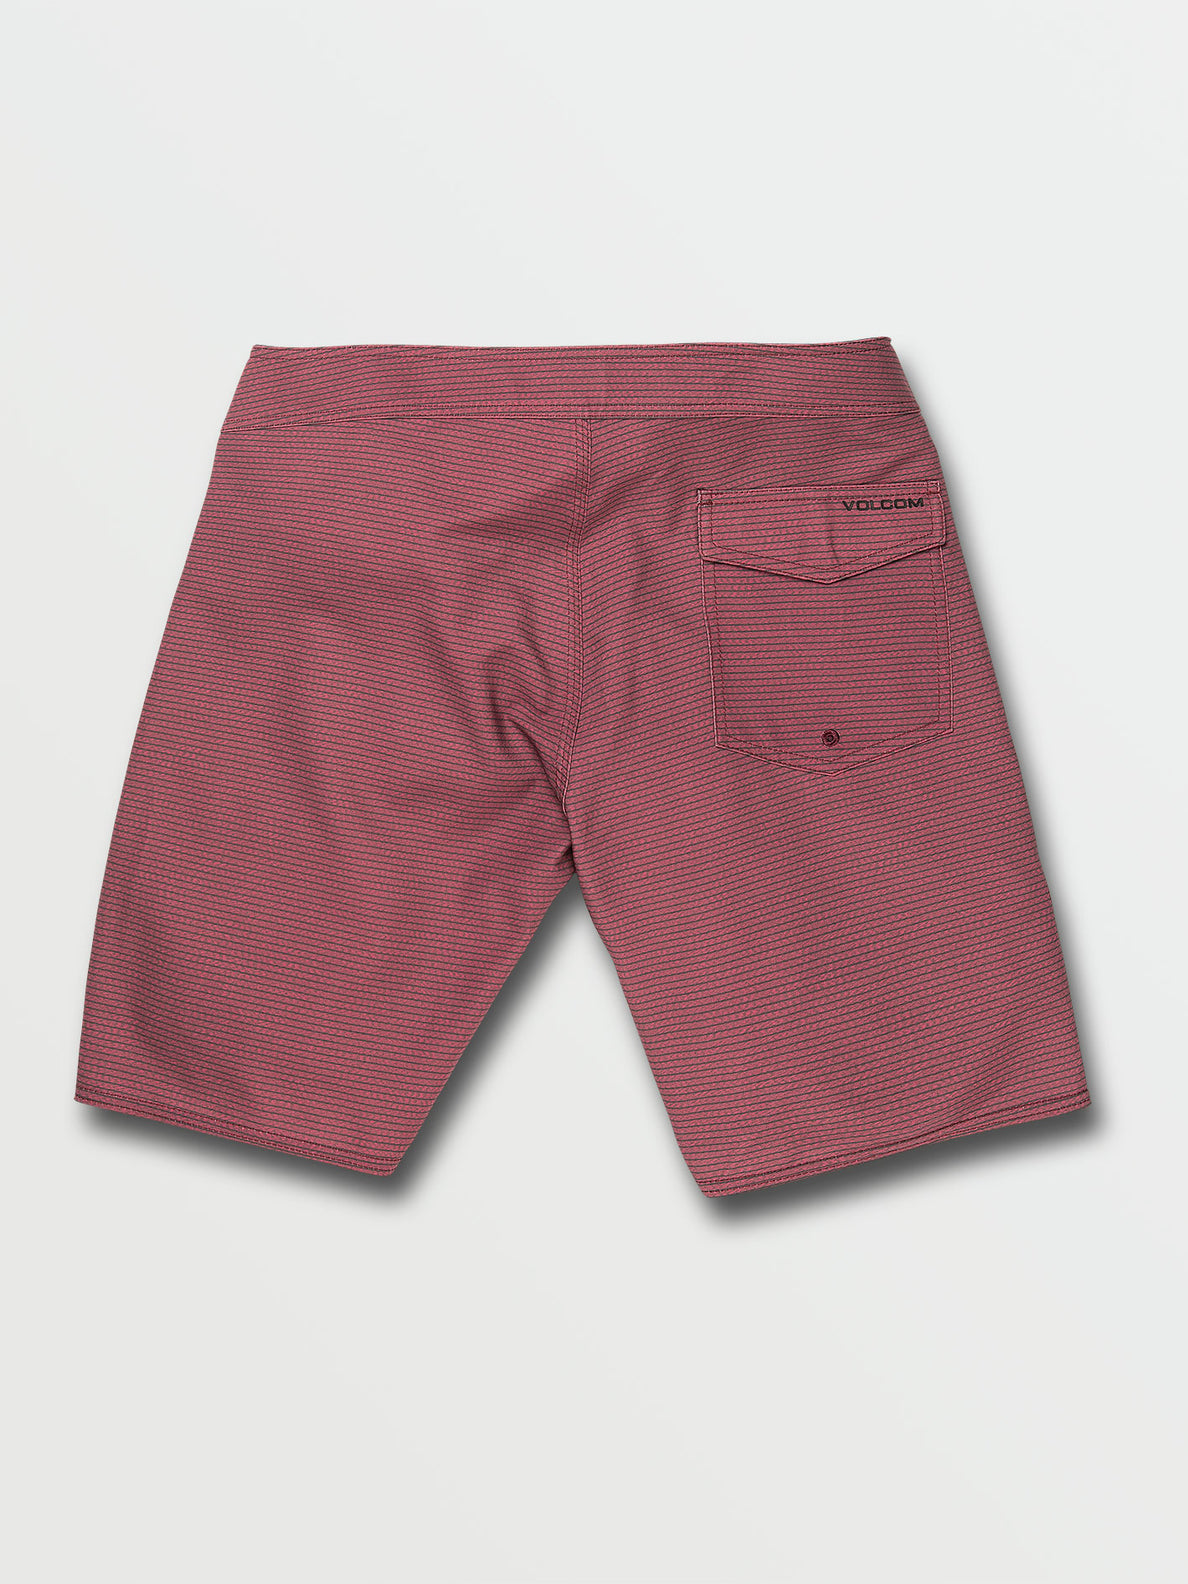 Too Hectik 2 Boardshorts - Bordeaux Brown (A0801900_BXB) [B]